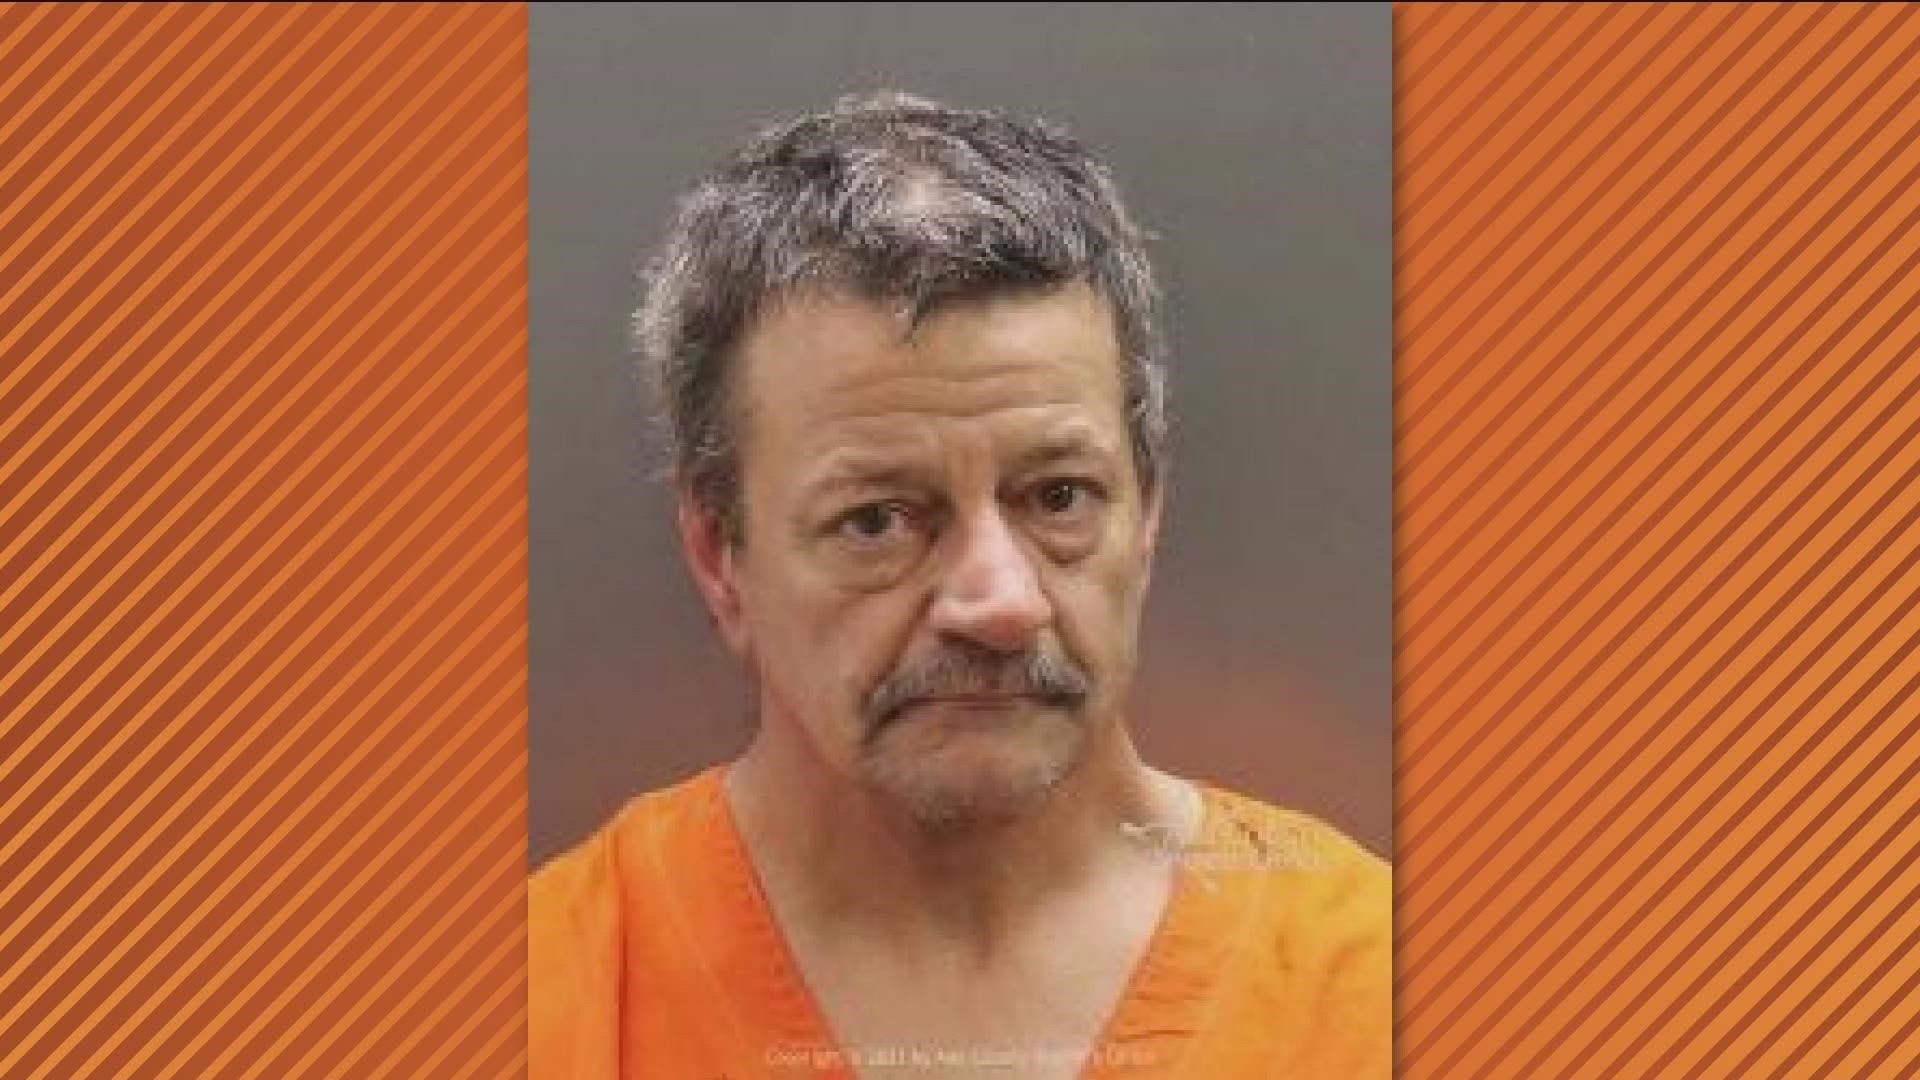 Danny Edwin Thompson, 55, is "extremely dangerous" according to the sheriff's office. He is 5'8", 150 pounds, with brown hair and eyes.